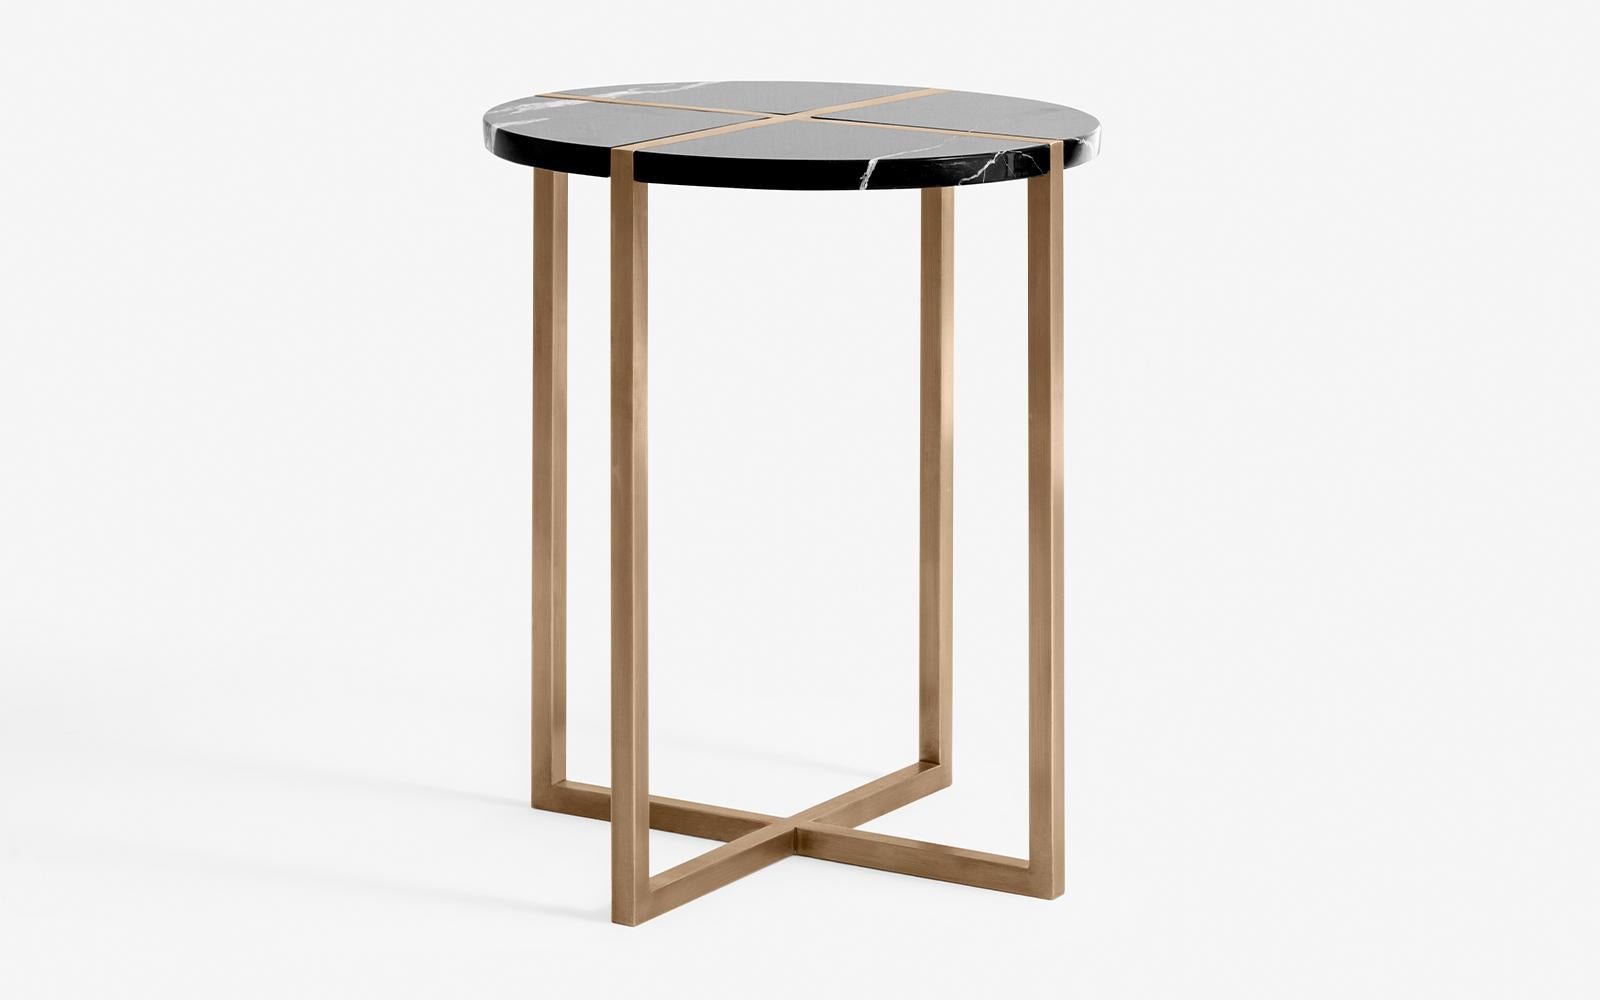 The Famed side table designed as a flawless intersection of marble and brass...

Measures: diameter: 17.7'' / height: 21.3''
Weight: 11.8 kg

-Alexander black marble
-Brass plated metal
-Registered design 

Alternatives:
carrara white marble /